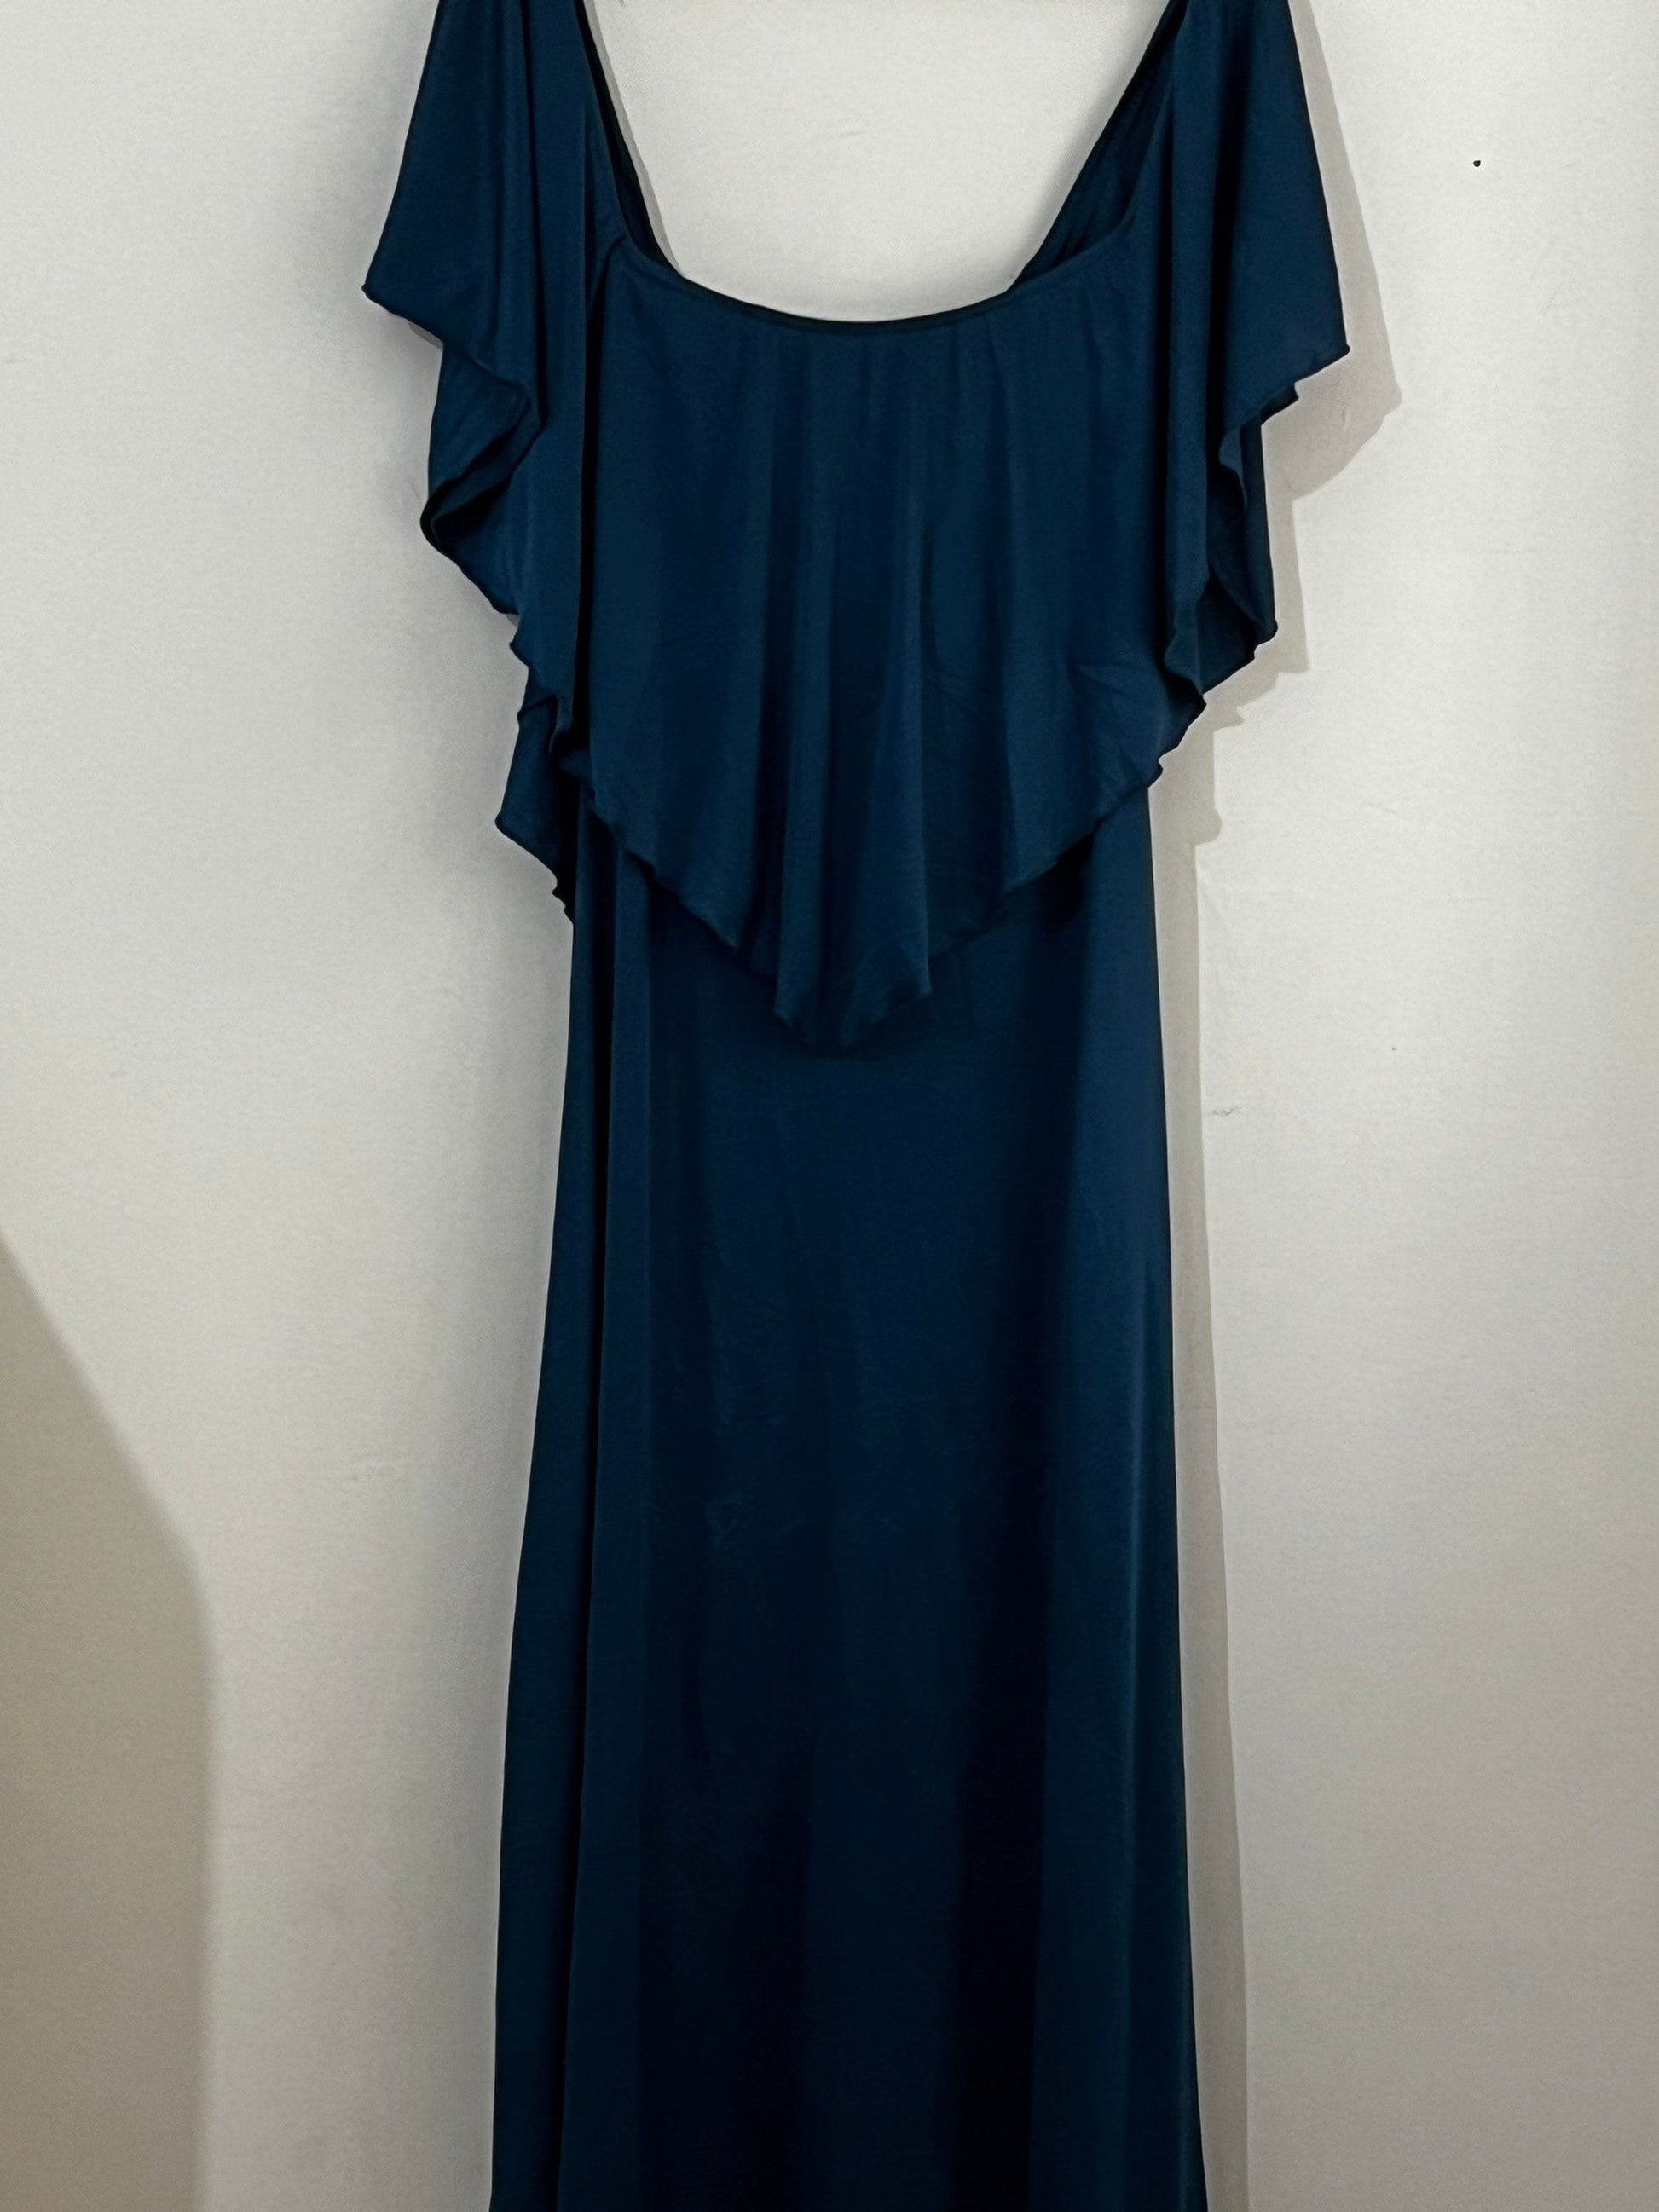 Vintage 70s Shawn Originals Off the shoulder maxi Dress Length Teal Dress with overwater panel UK Size 10-12 Active Restock requests: 0